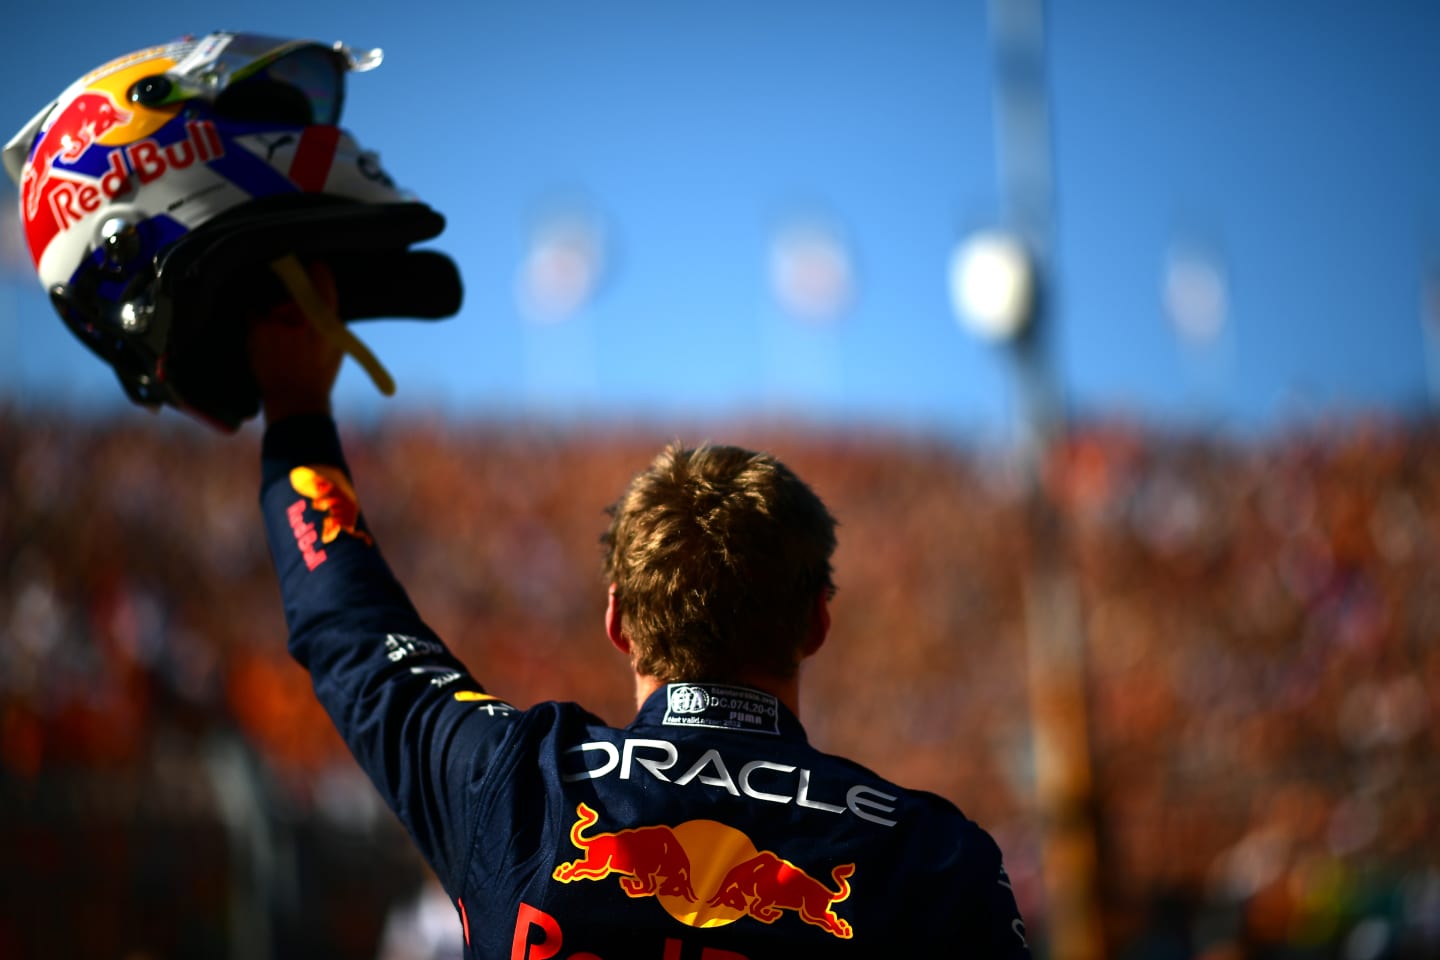 ZANDVOORT, NETHERLANDS - SEPTEMBER 03: Pole position qualifier Max Verstappen of the Netherlands and Oracle Red Bull Racing celebrates in parc ferme during qualifying ahead of the F1 Grand Prix of The Netherlands at Circuit Zandvoort on September 03, 2022 in Zandvoort, Netherlands. (Photo by Mario Renzi - Formula 1/Formula 1 via Getty Images)